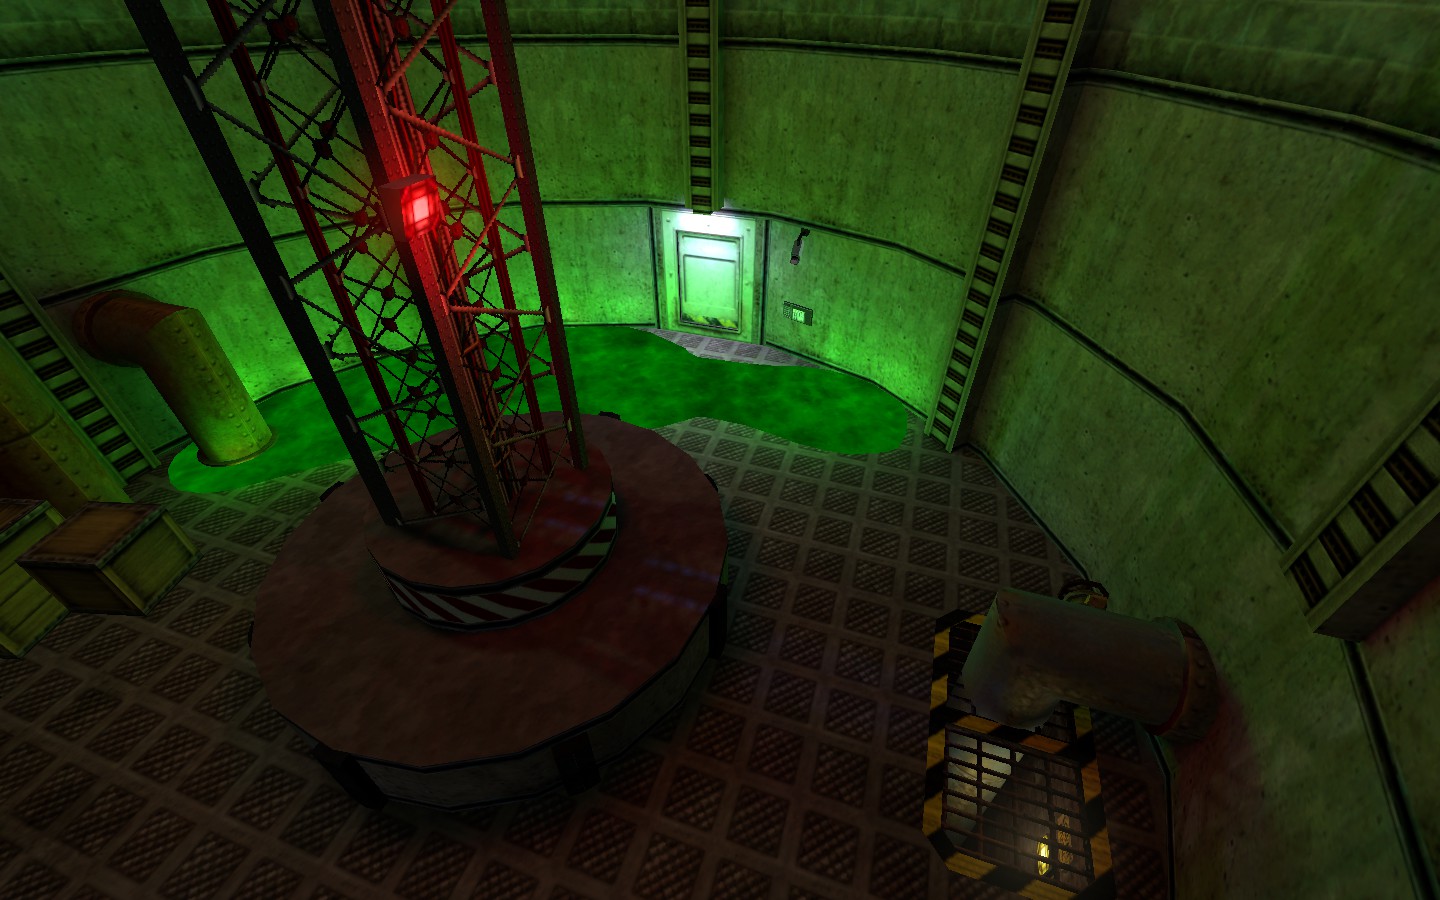 Half-Life download the new version for ios